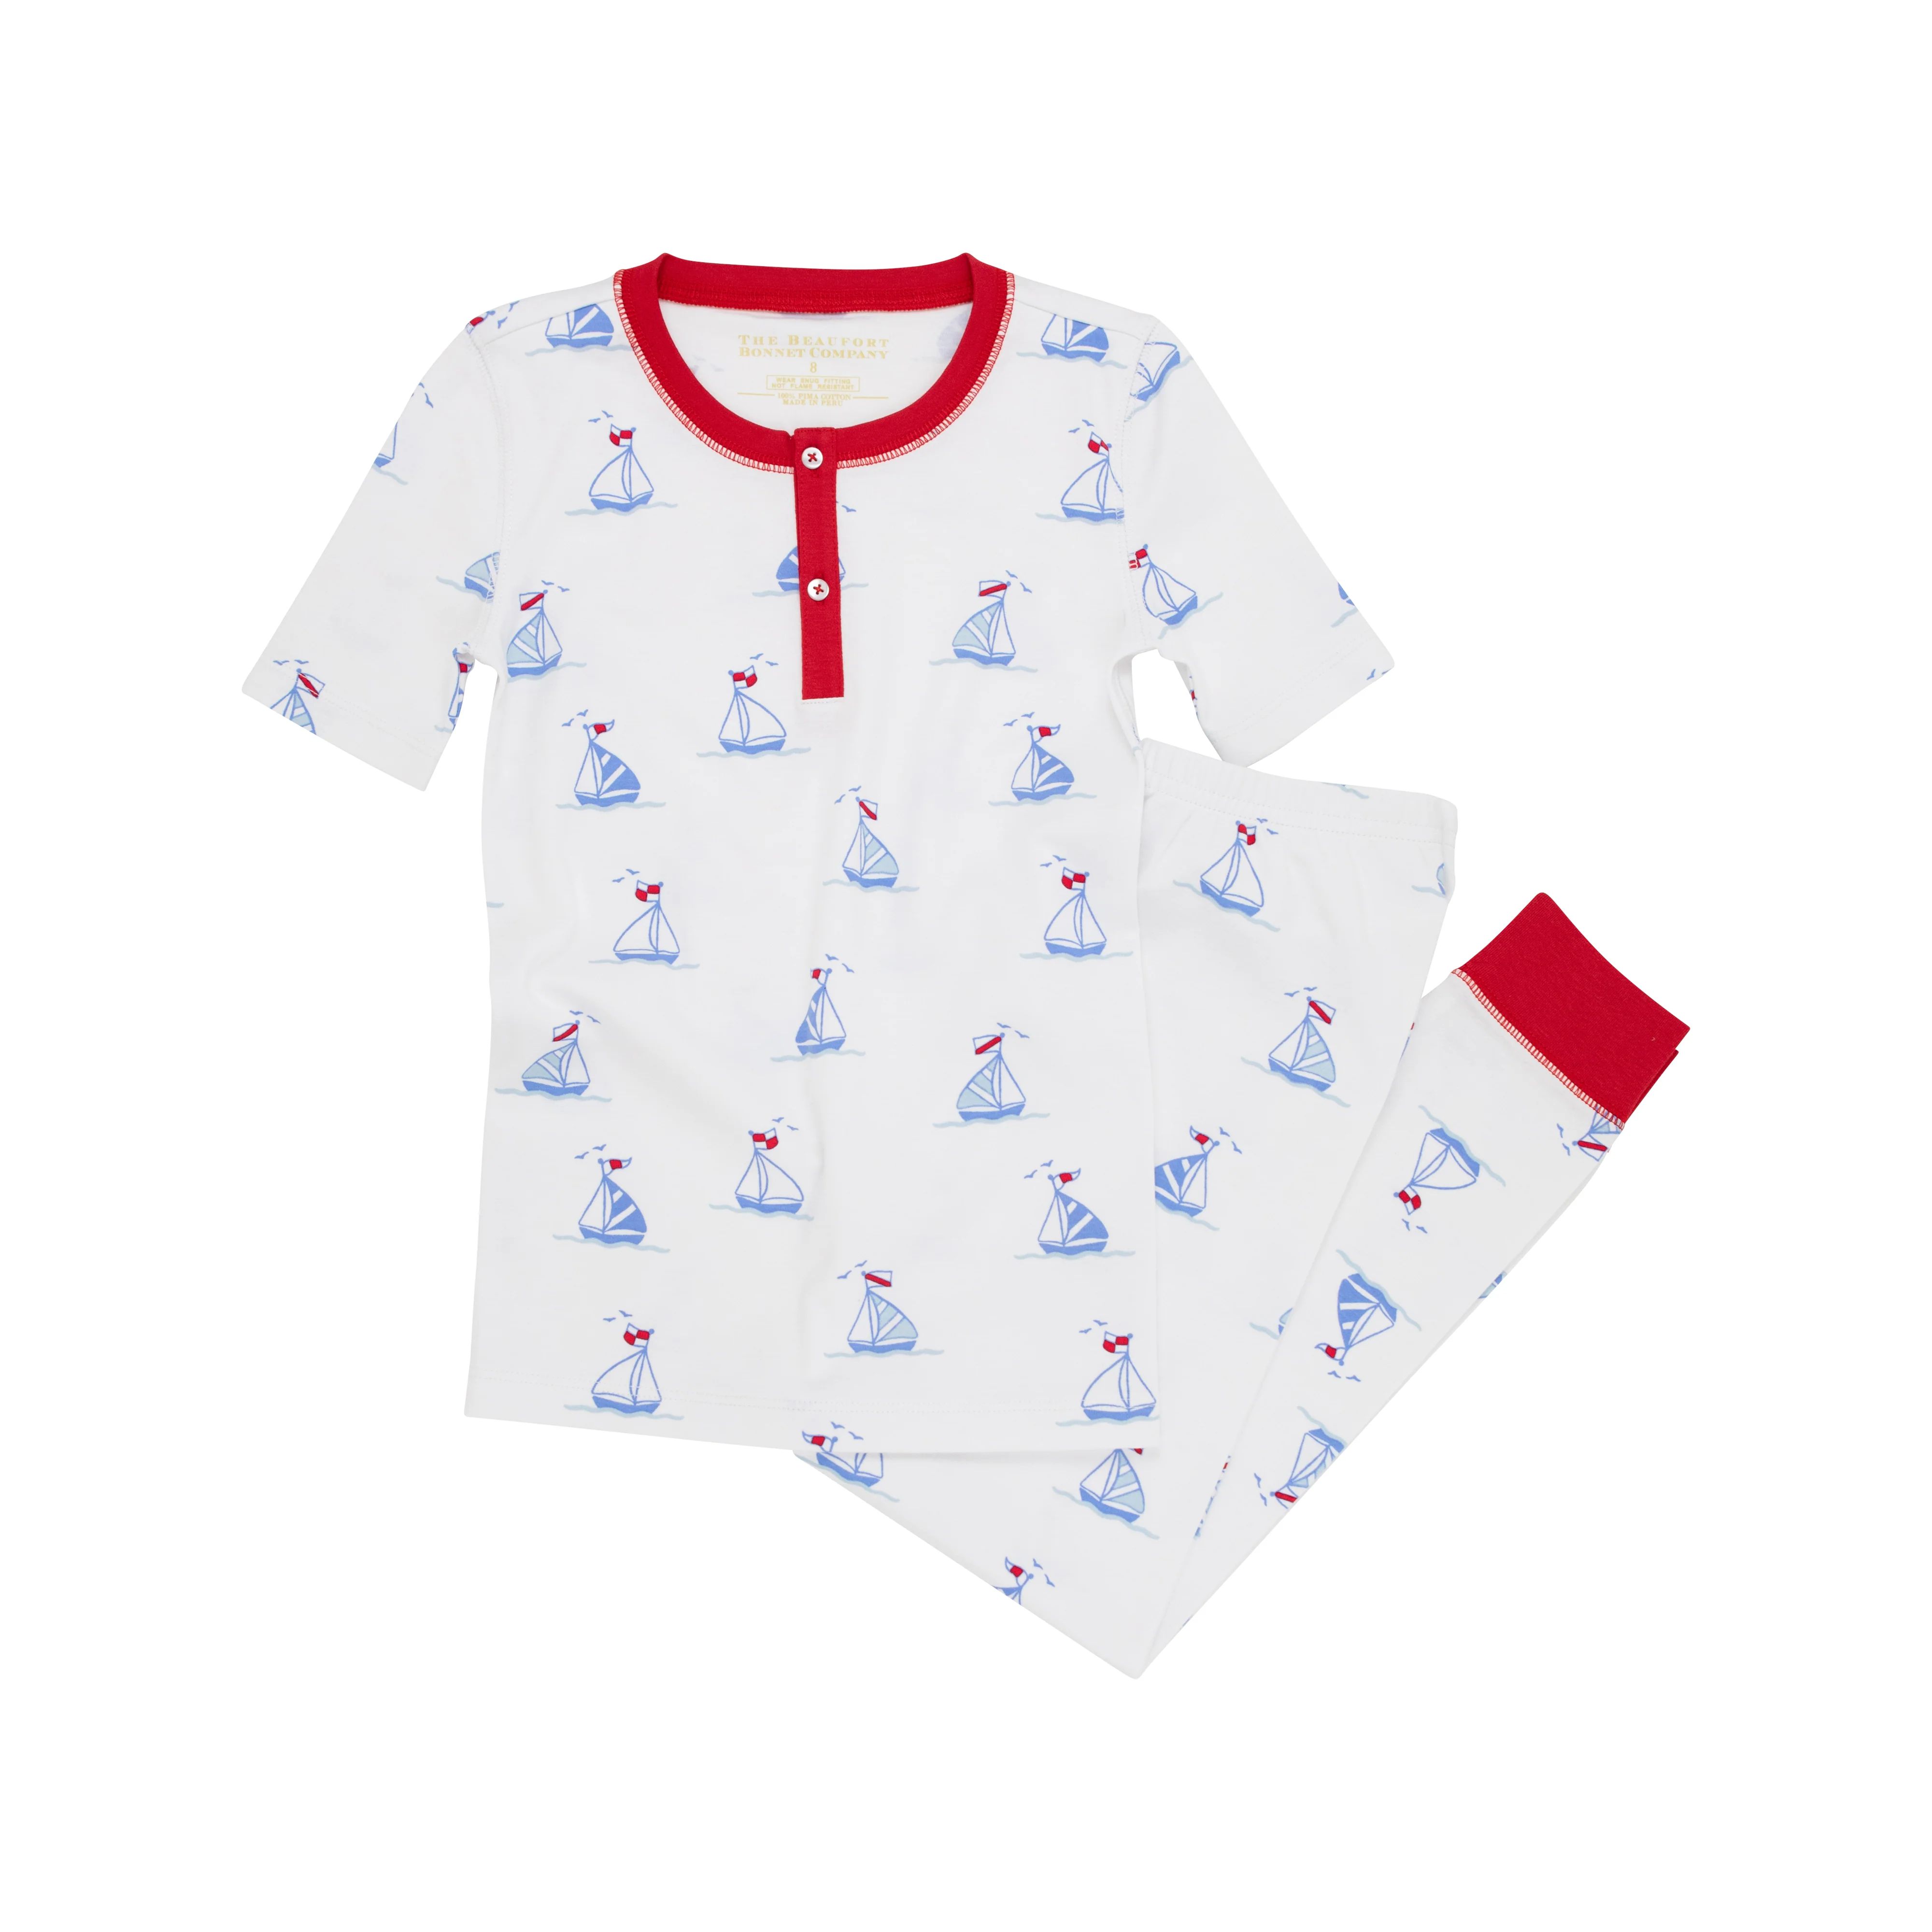 Sutton's Short Sleeve Set (Unisex) - Chesapeake Bay Boats with Richmond Red | The Beaufort Bonnet Company